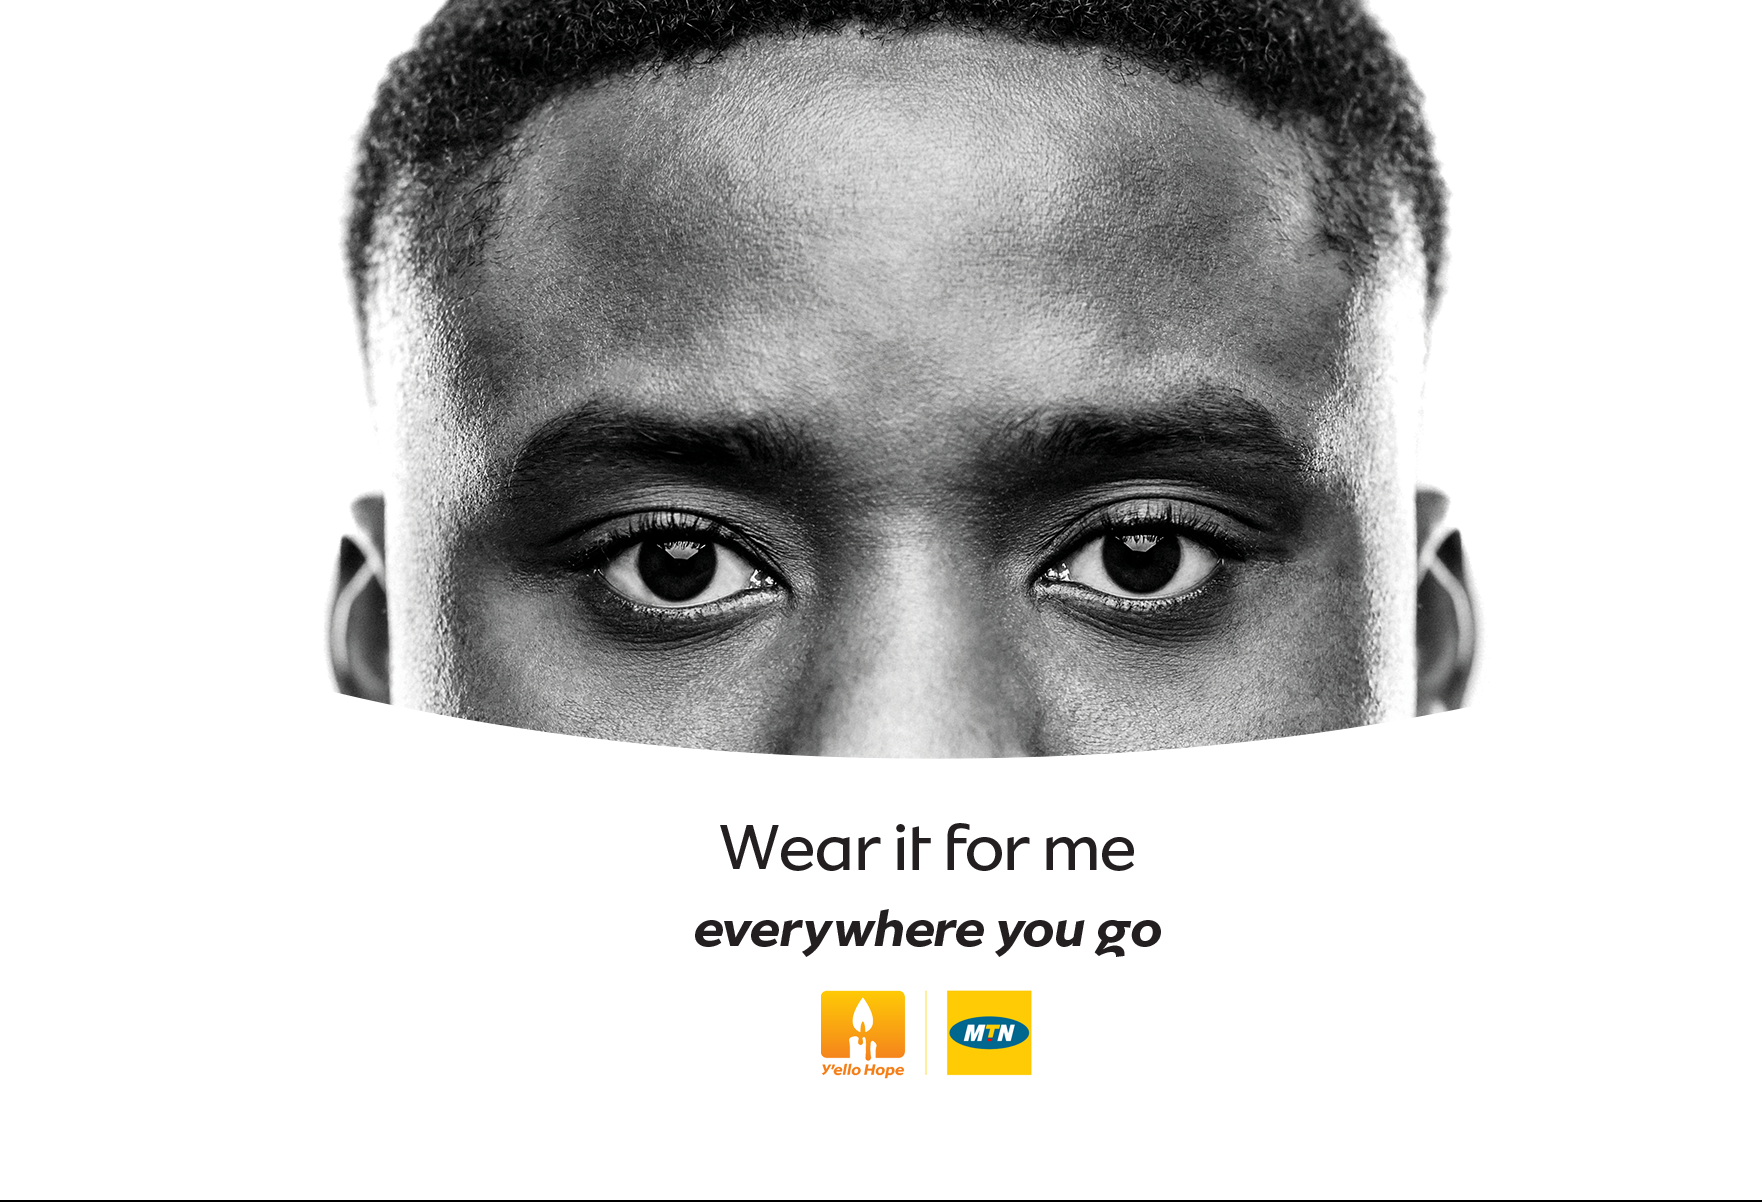 MTN steps up COVID fight with new campaign promoting mask-wearing - MTN  Group